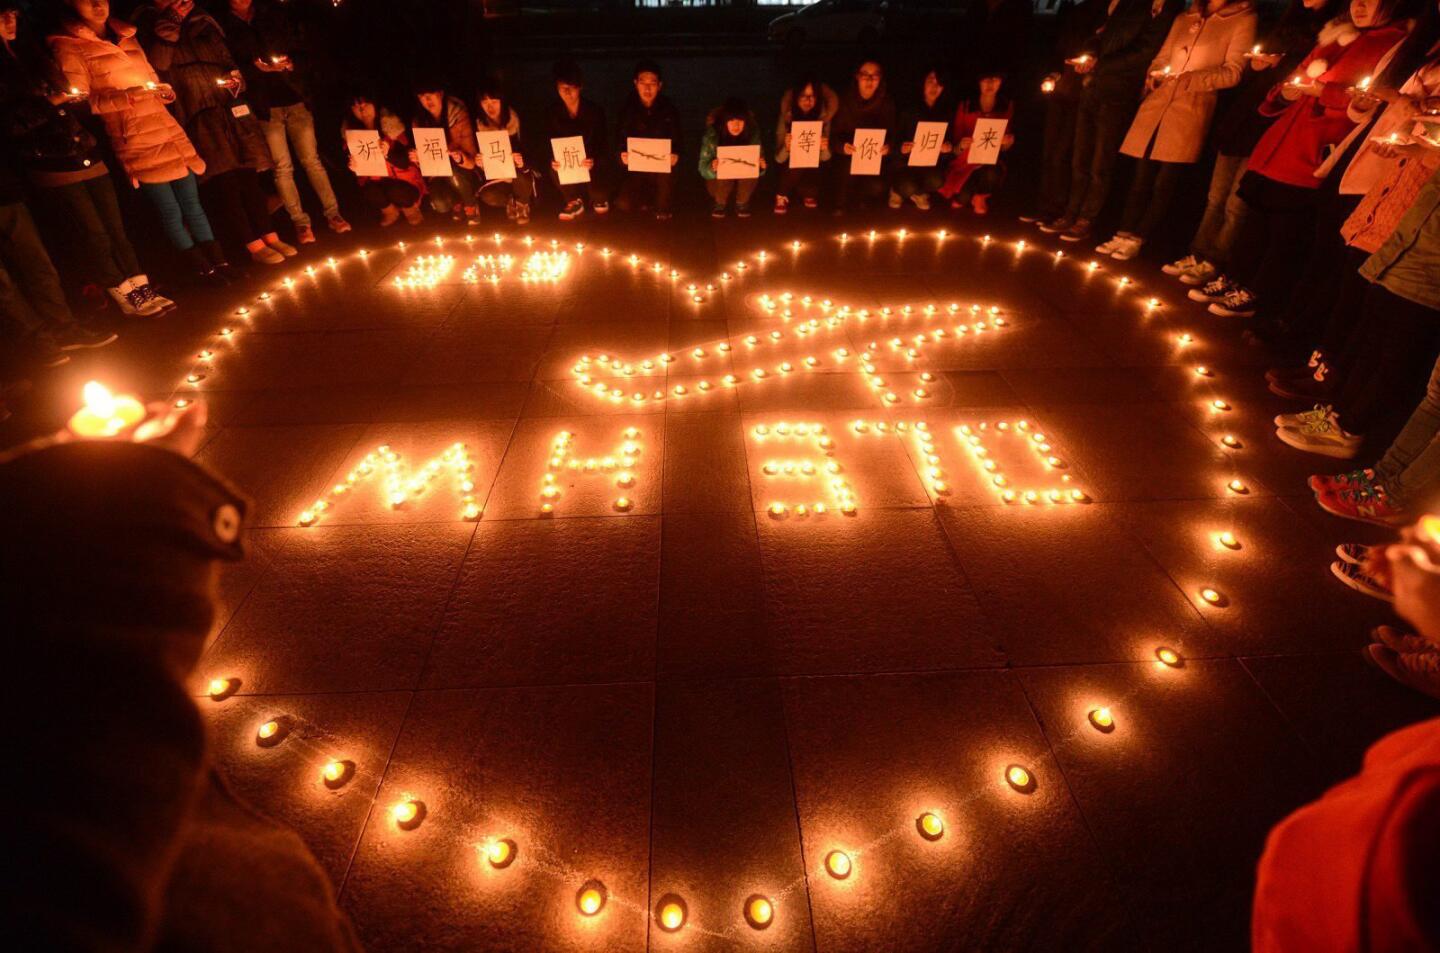 A picture made available on 15 March 2014 shows college students holding a candlelight vigil for the passengers on the missing Malaysia Airlines airliner MH370 in Yangzhou, Jiangsu province, China, on 13 March 2014.